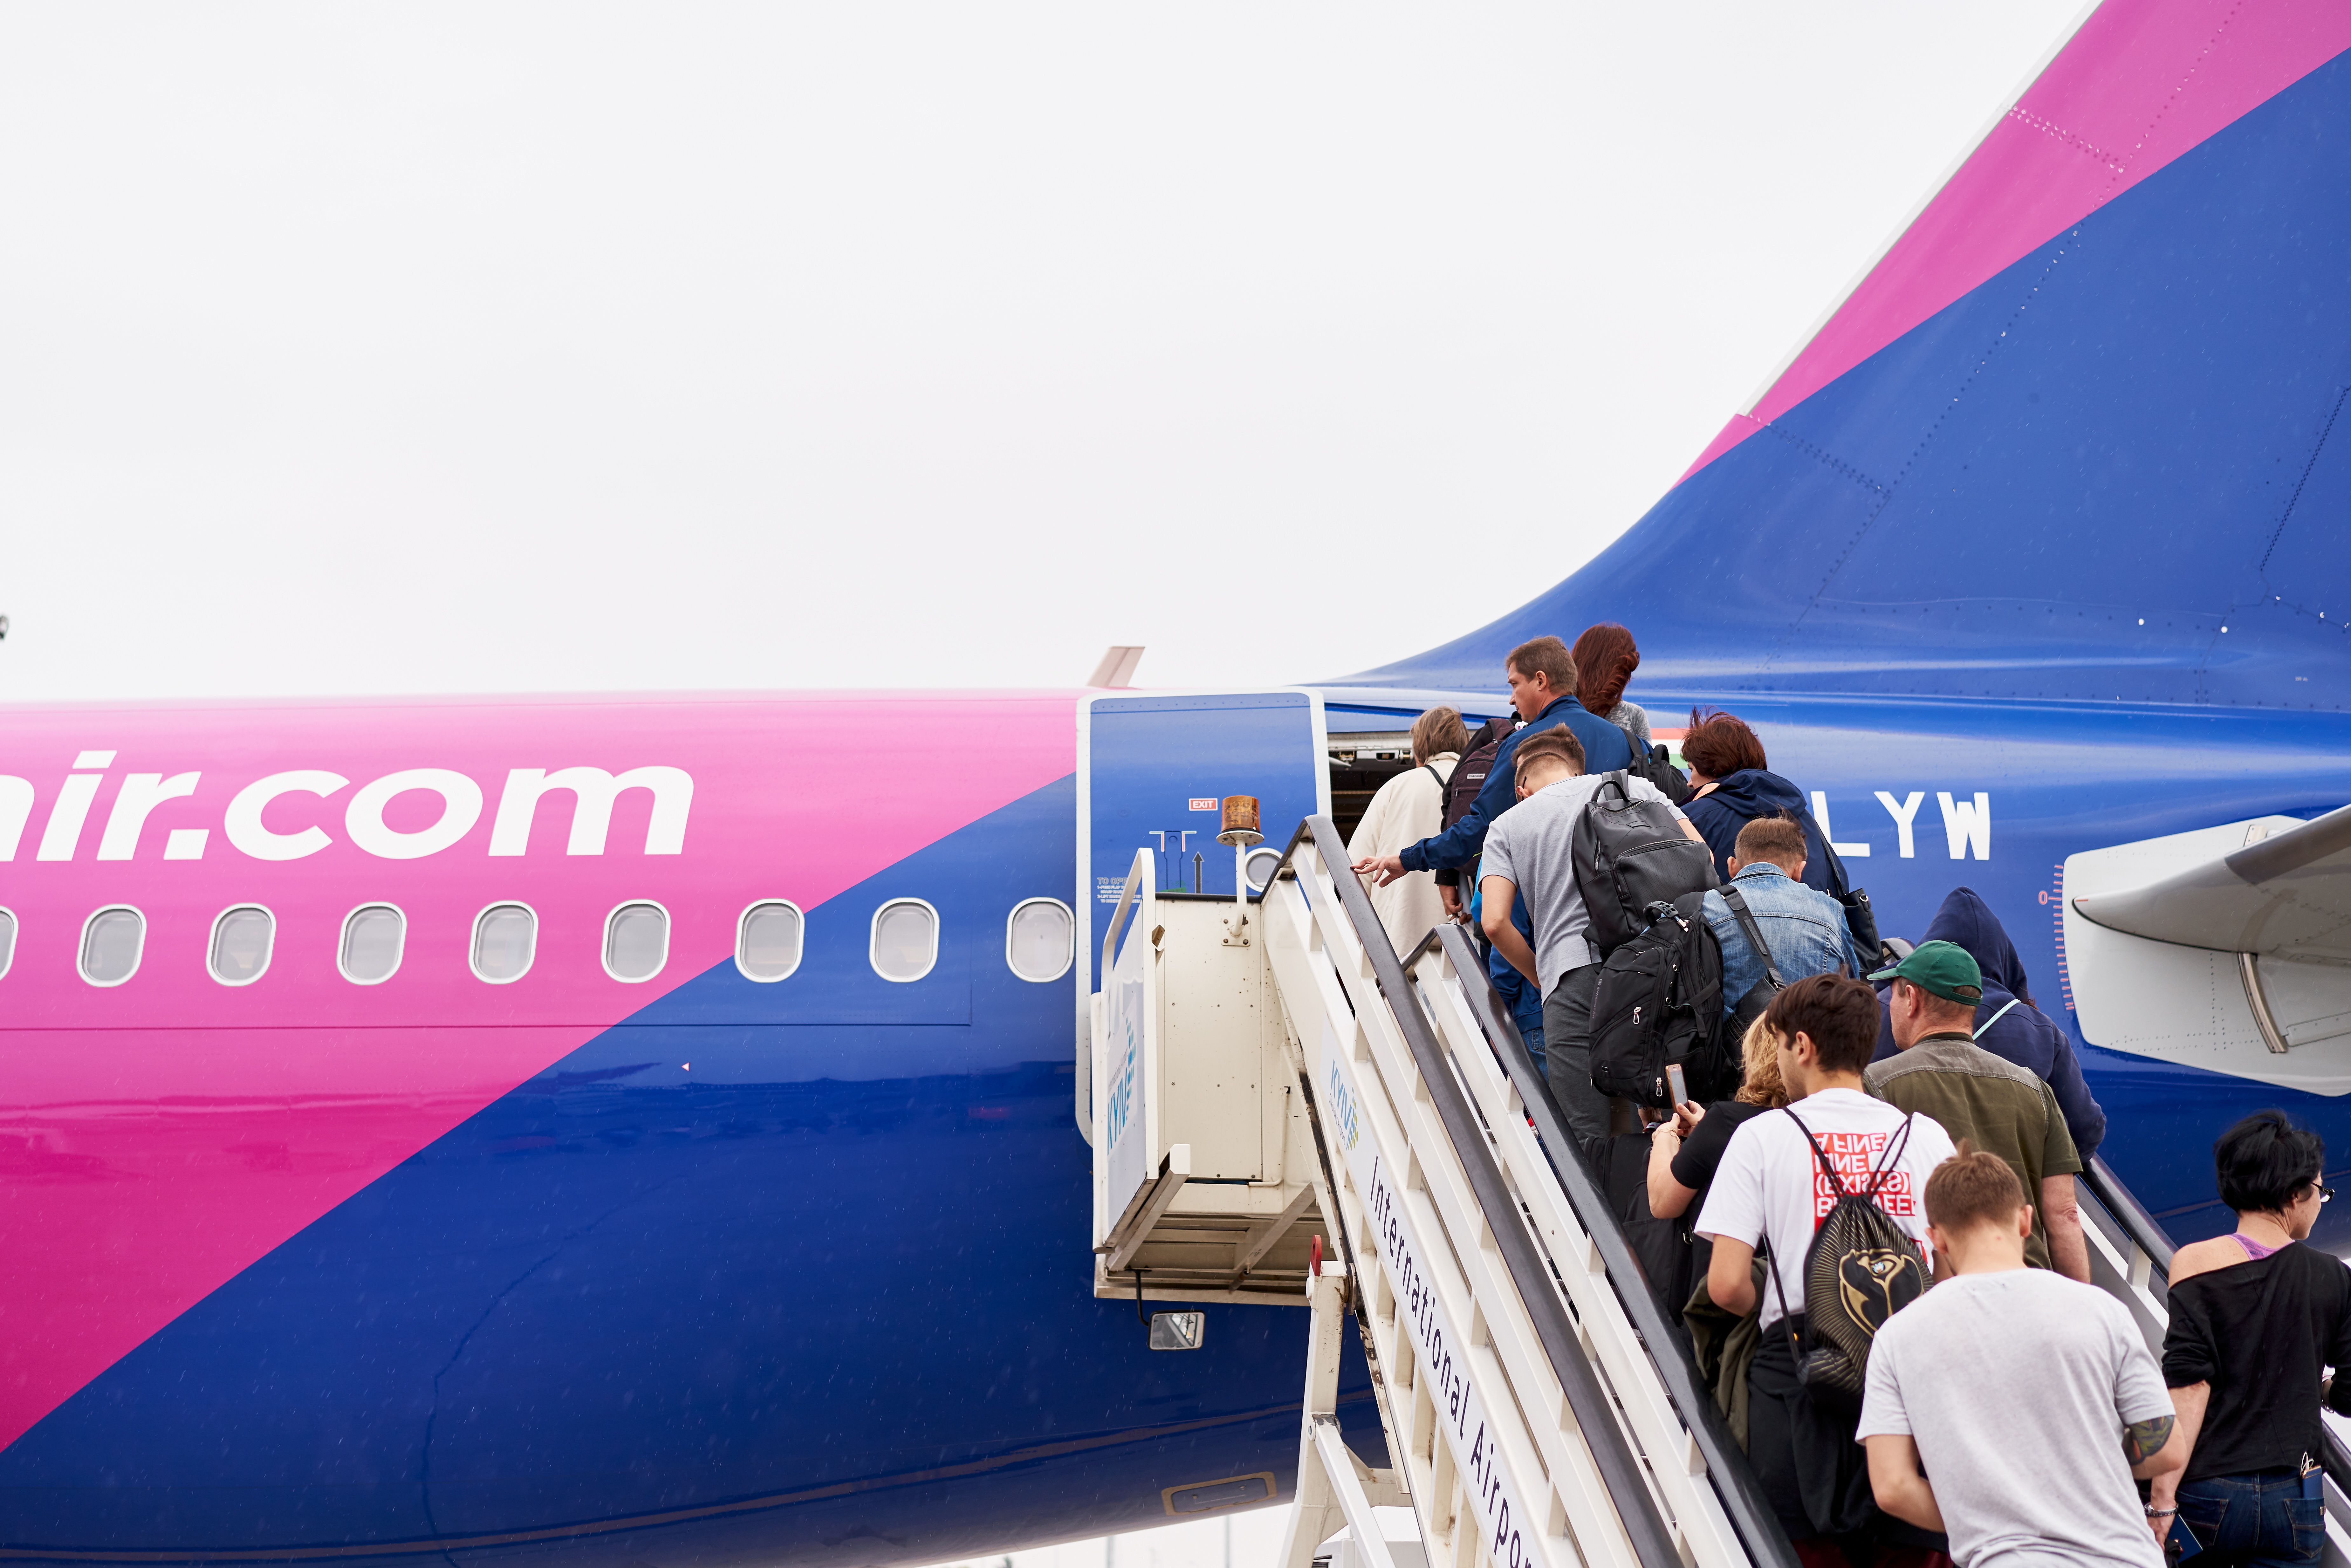 Wizz Air passengers waiting to board Airbus A320